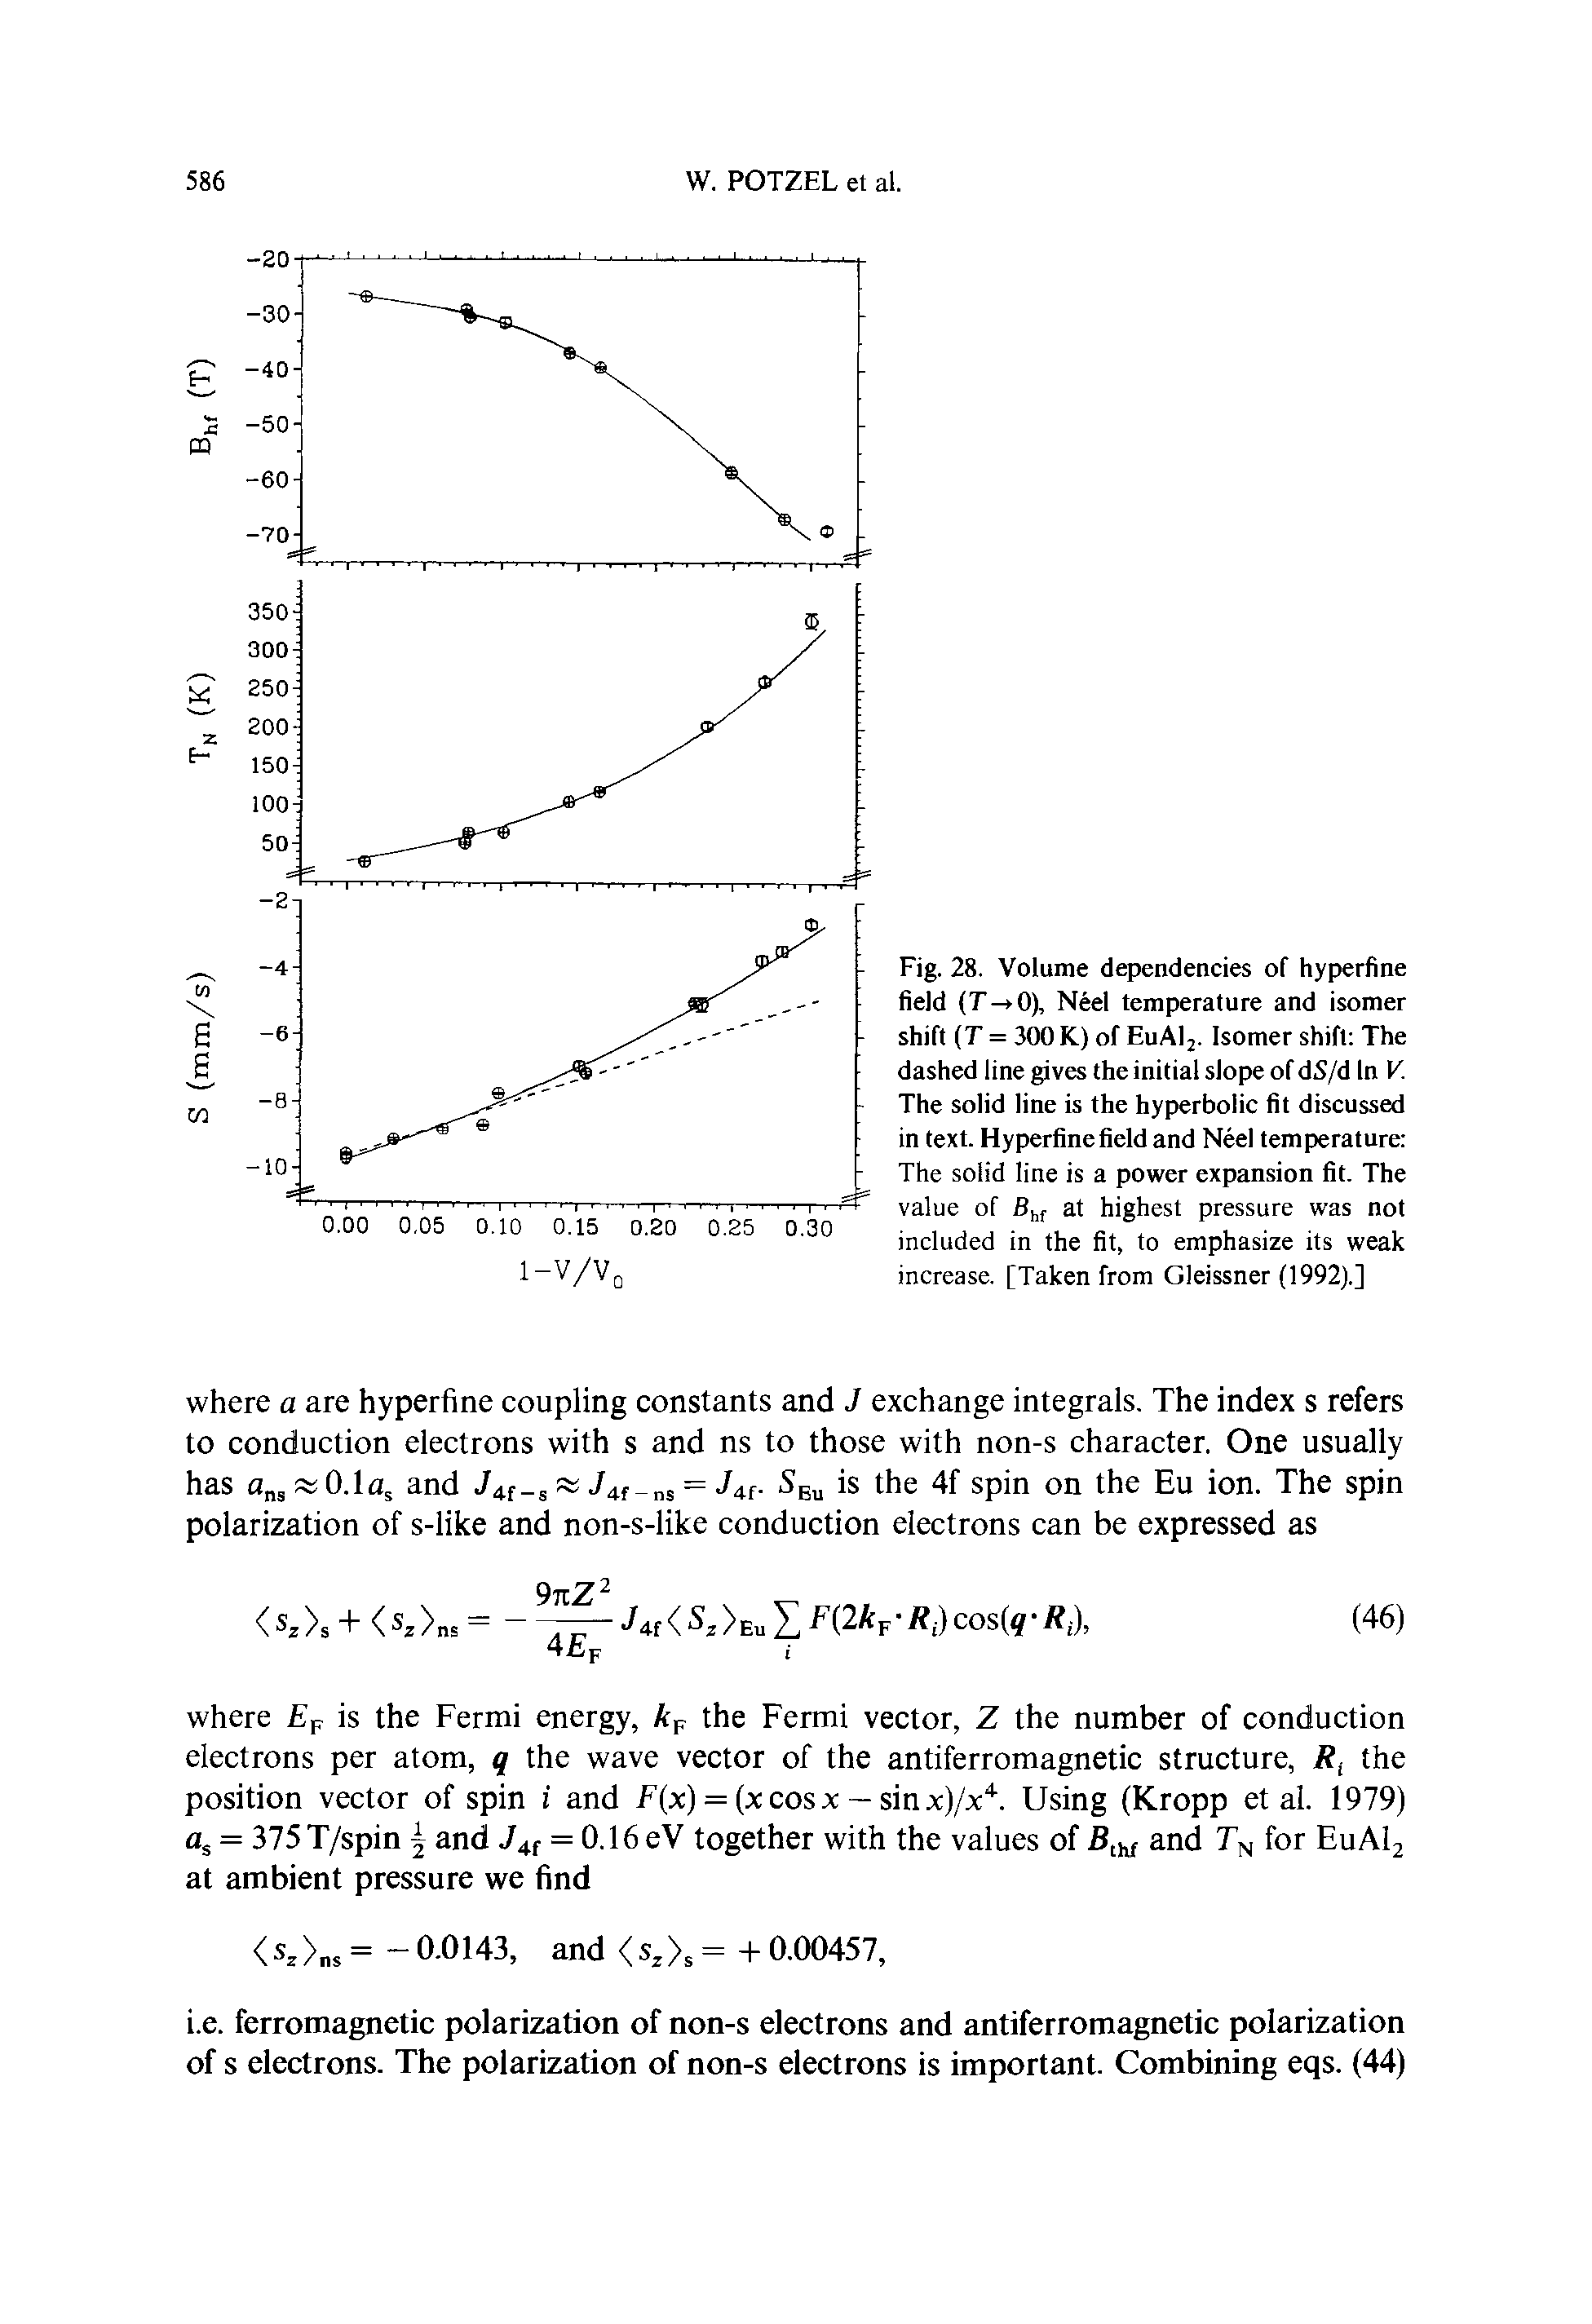 Fig. 28. Volume dependencies of hyperfine field (T->0), Neel temperature and isomer shift (T = 300 K) of EuAlj. Isomer shift The dashed line gives the initial slope of dS/d In K The solid line is the hyperbolic fit discussed in text. Hyperfine field and Neel temperature The solid line is a power expansion fit. The value of at highest pressure was not included in the fit, to emphasize its weak increase. [Taken from Gleissner (1992).]...